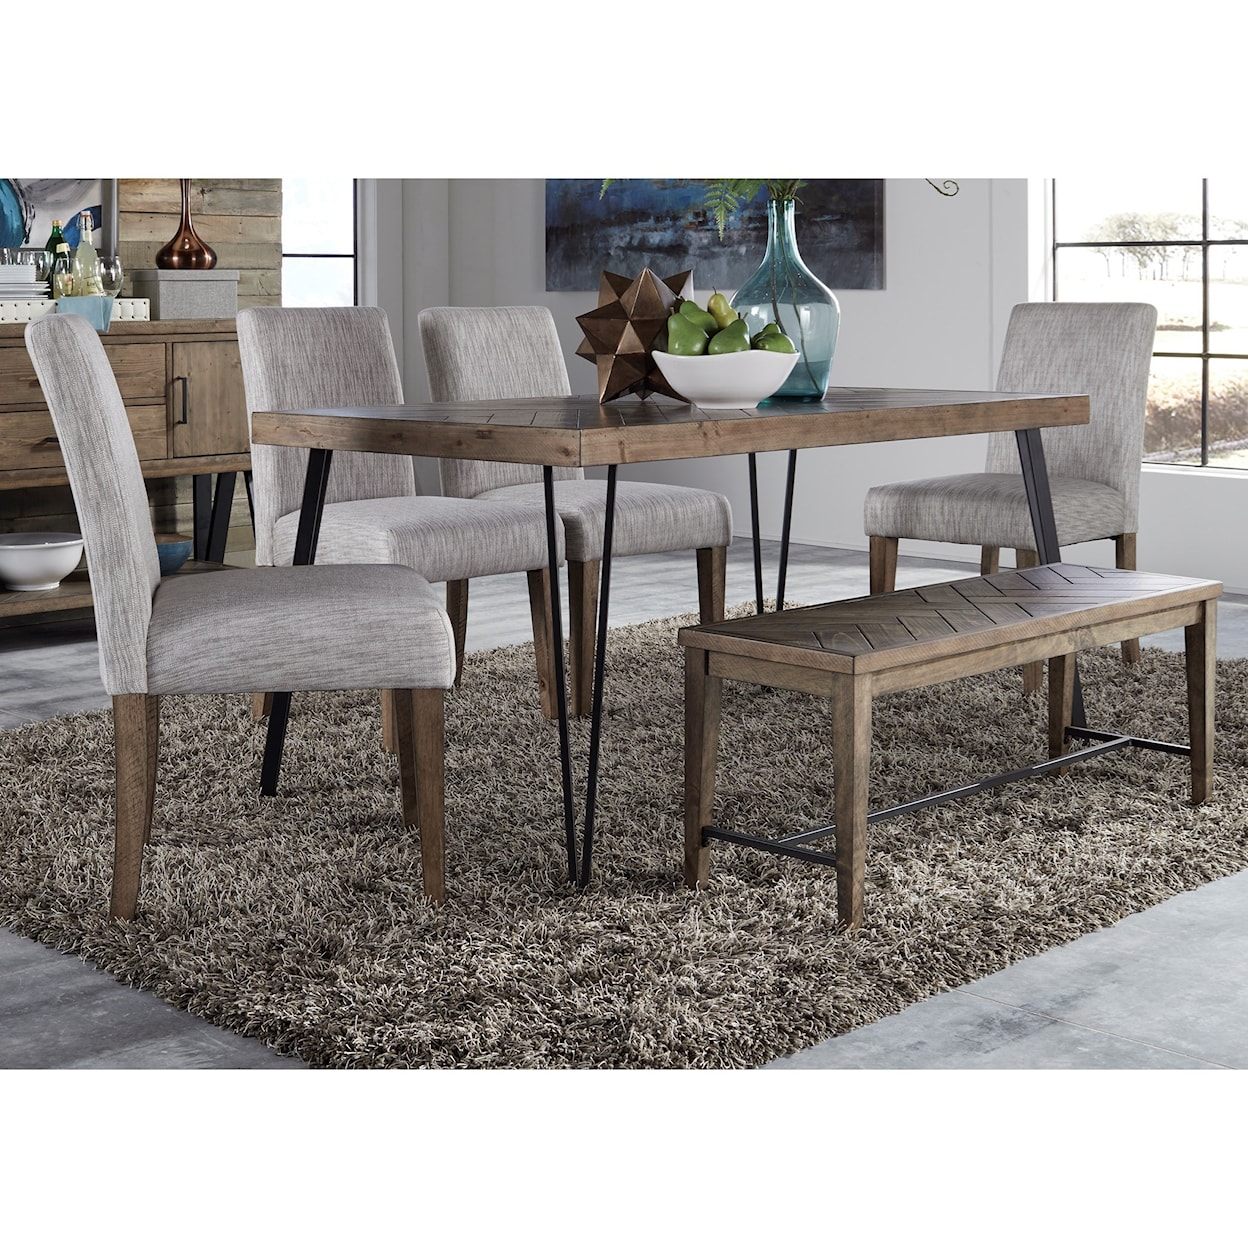 Libby Horizons Upholstered Dining Side Chair